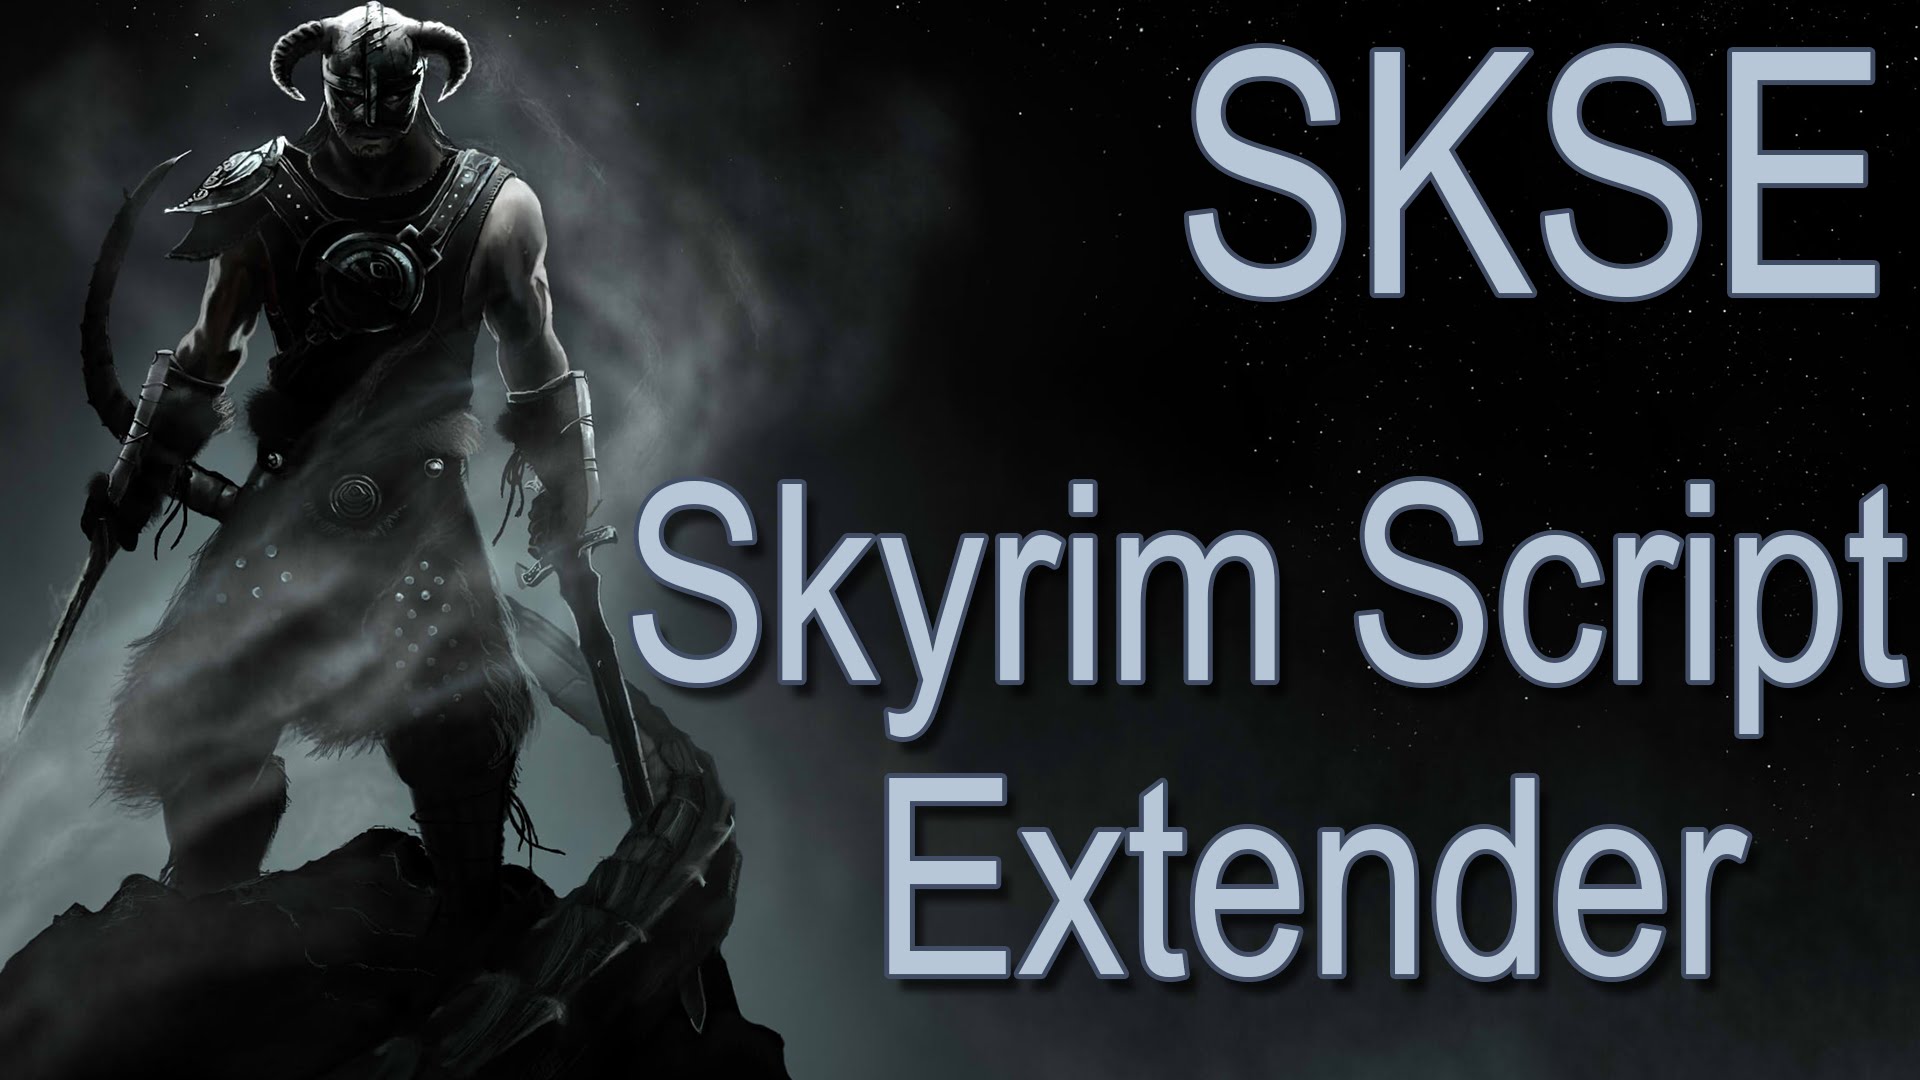 Skyrim Script Extender 64 is now available in alpha